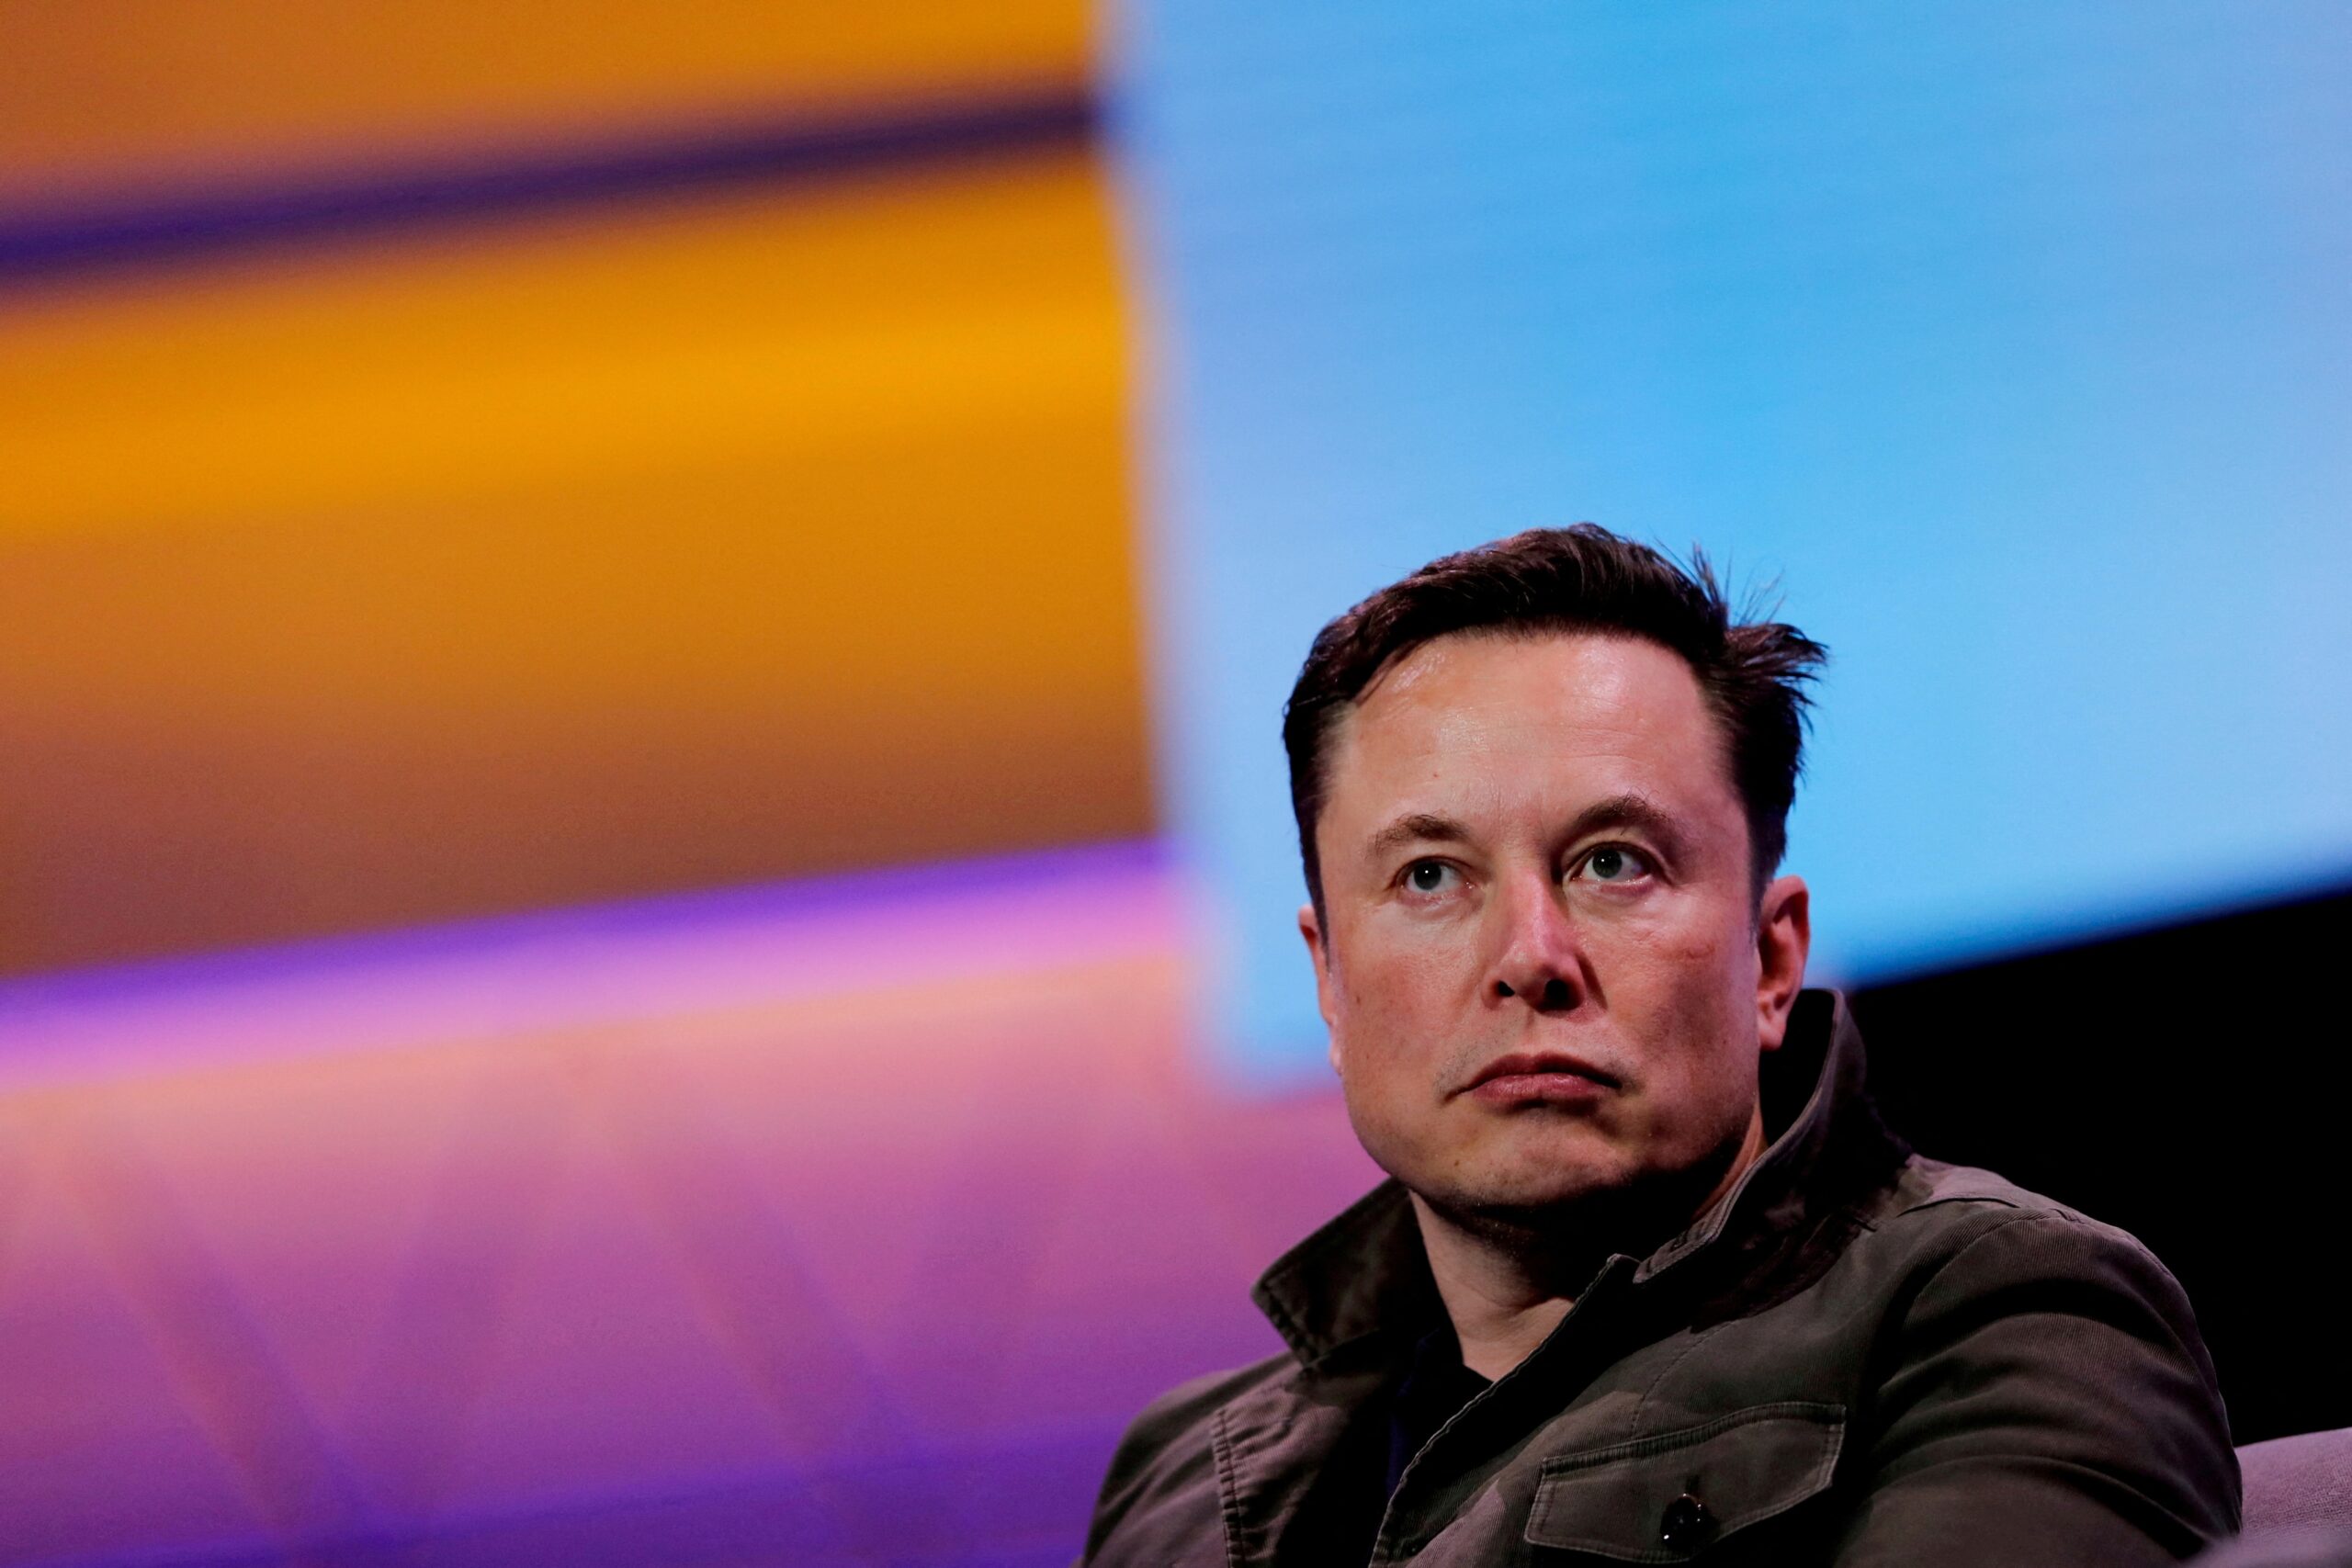 Why X’s Valuation Dropped Under Elon Musk